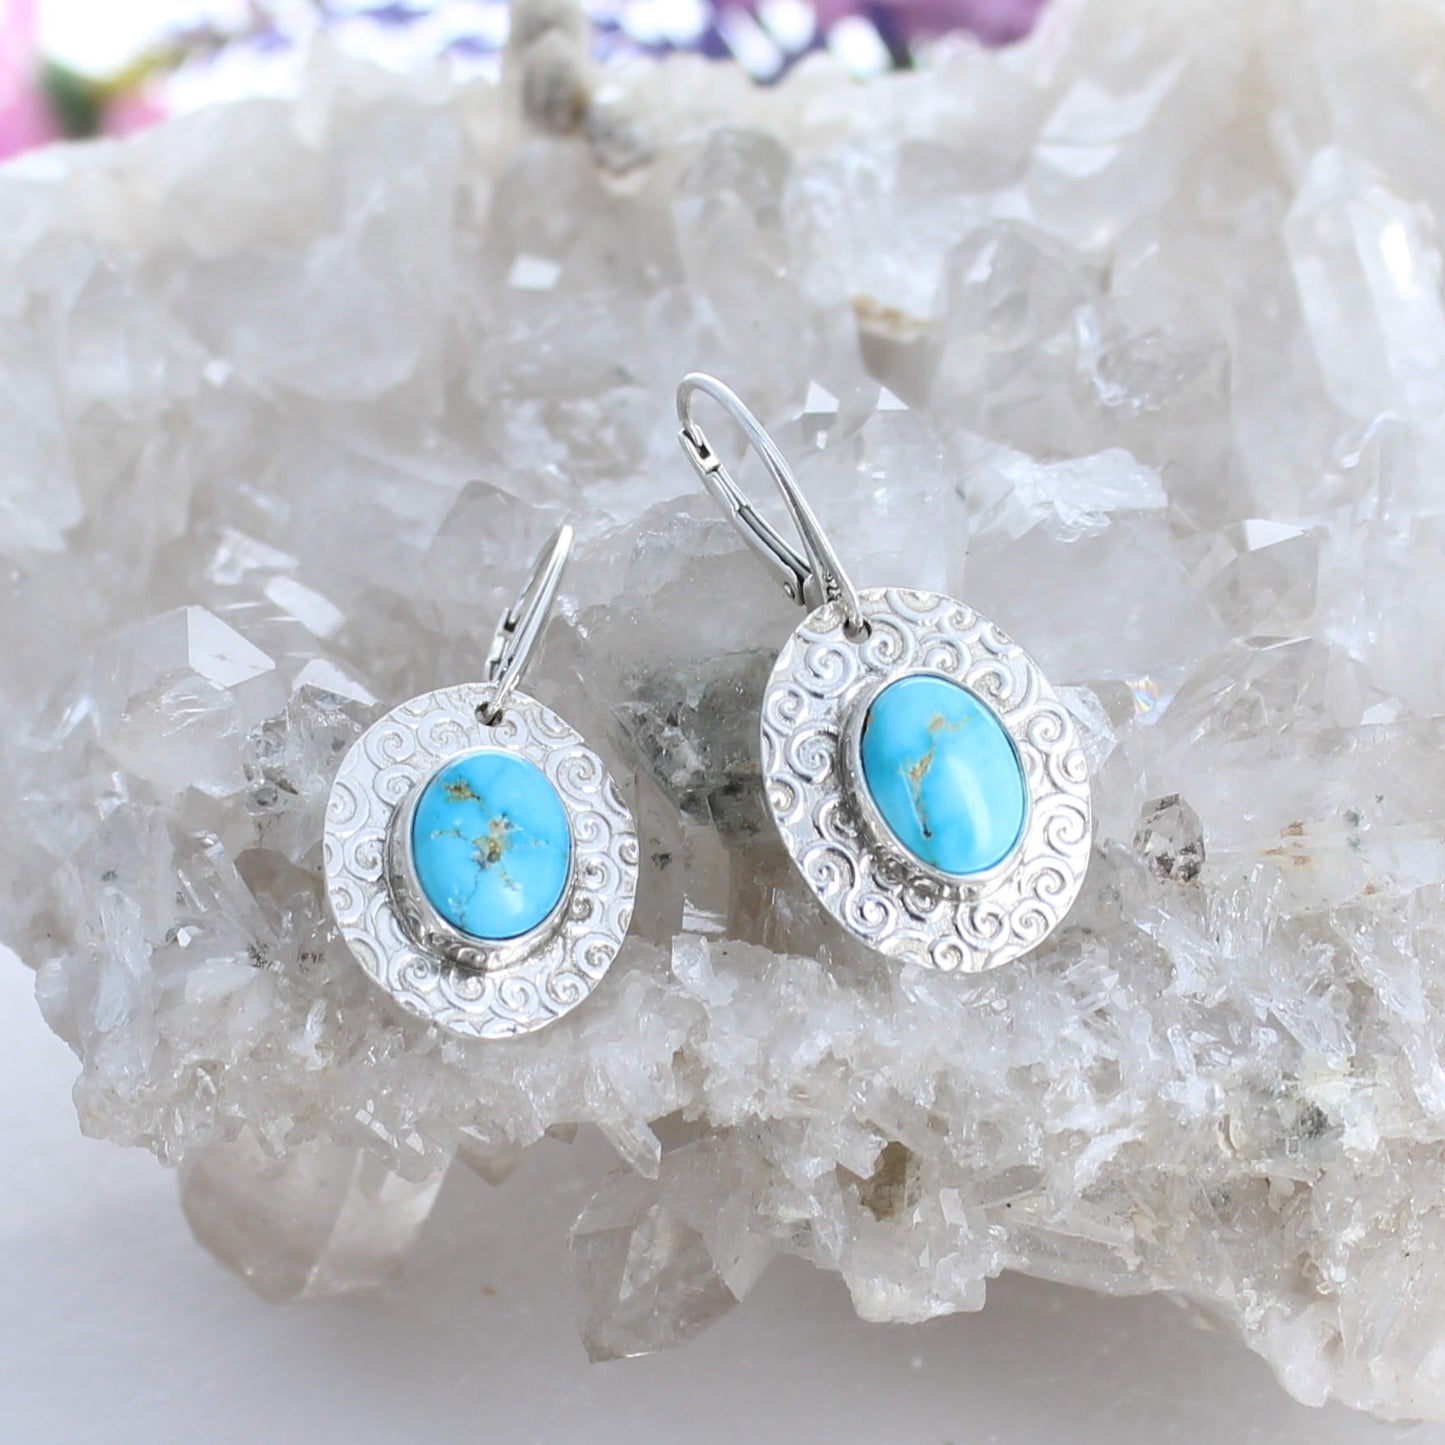 Bright Blue South Hill Turquoise Earrings Sterling Silver